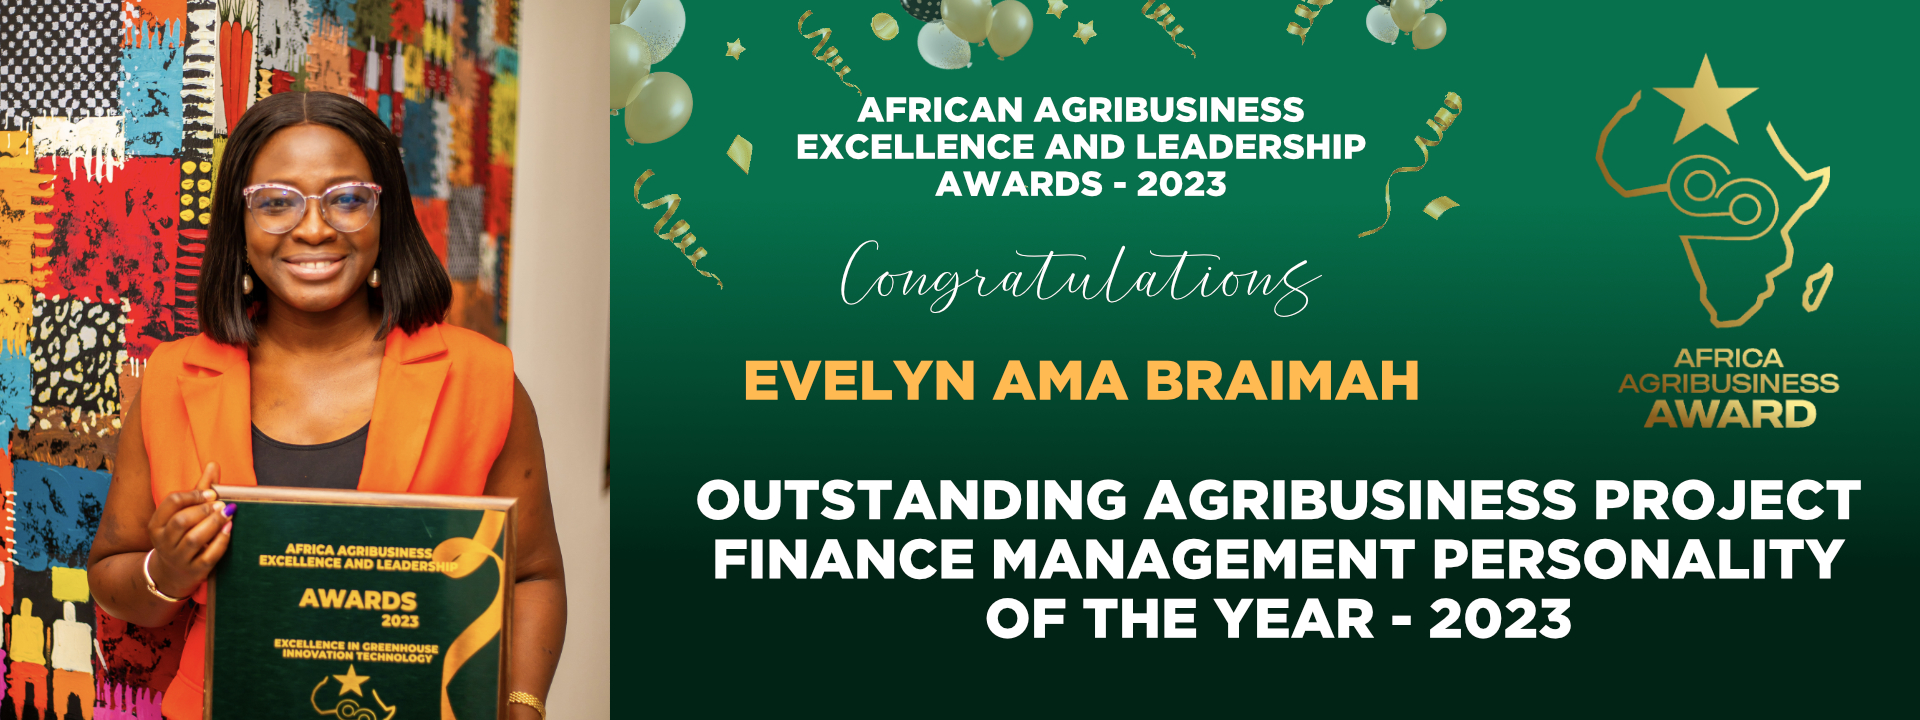 Outstanding Agribusiness Project Finance Management Personality of the year - 2023